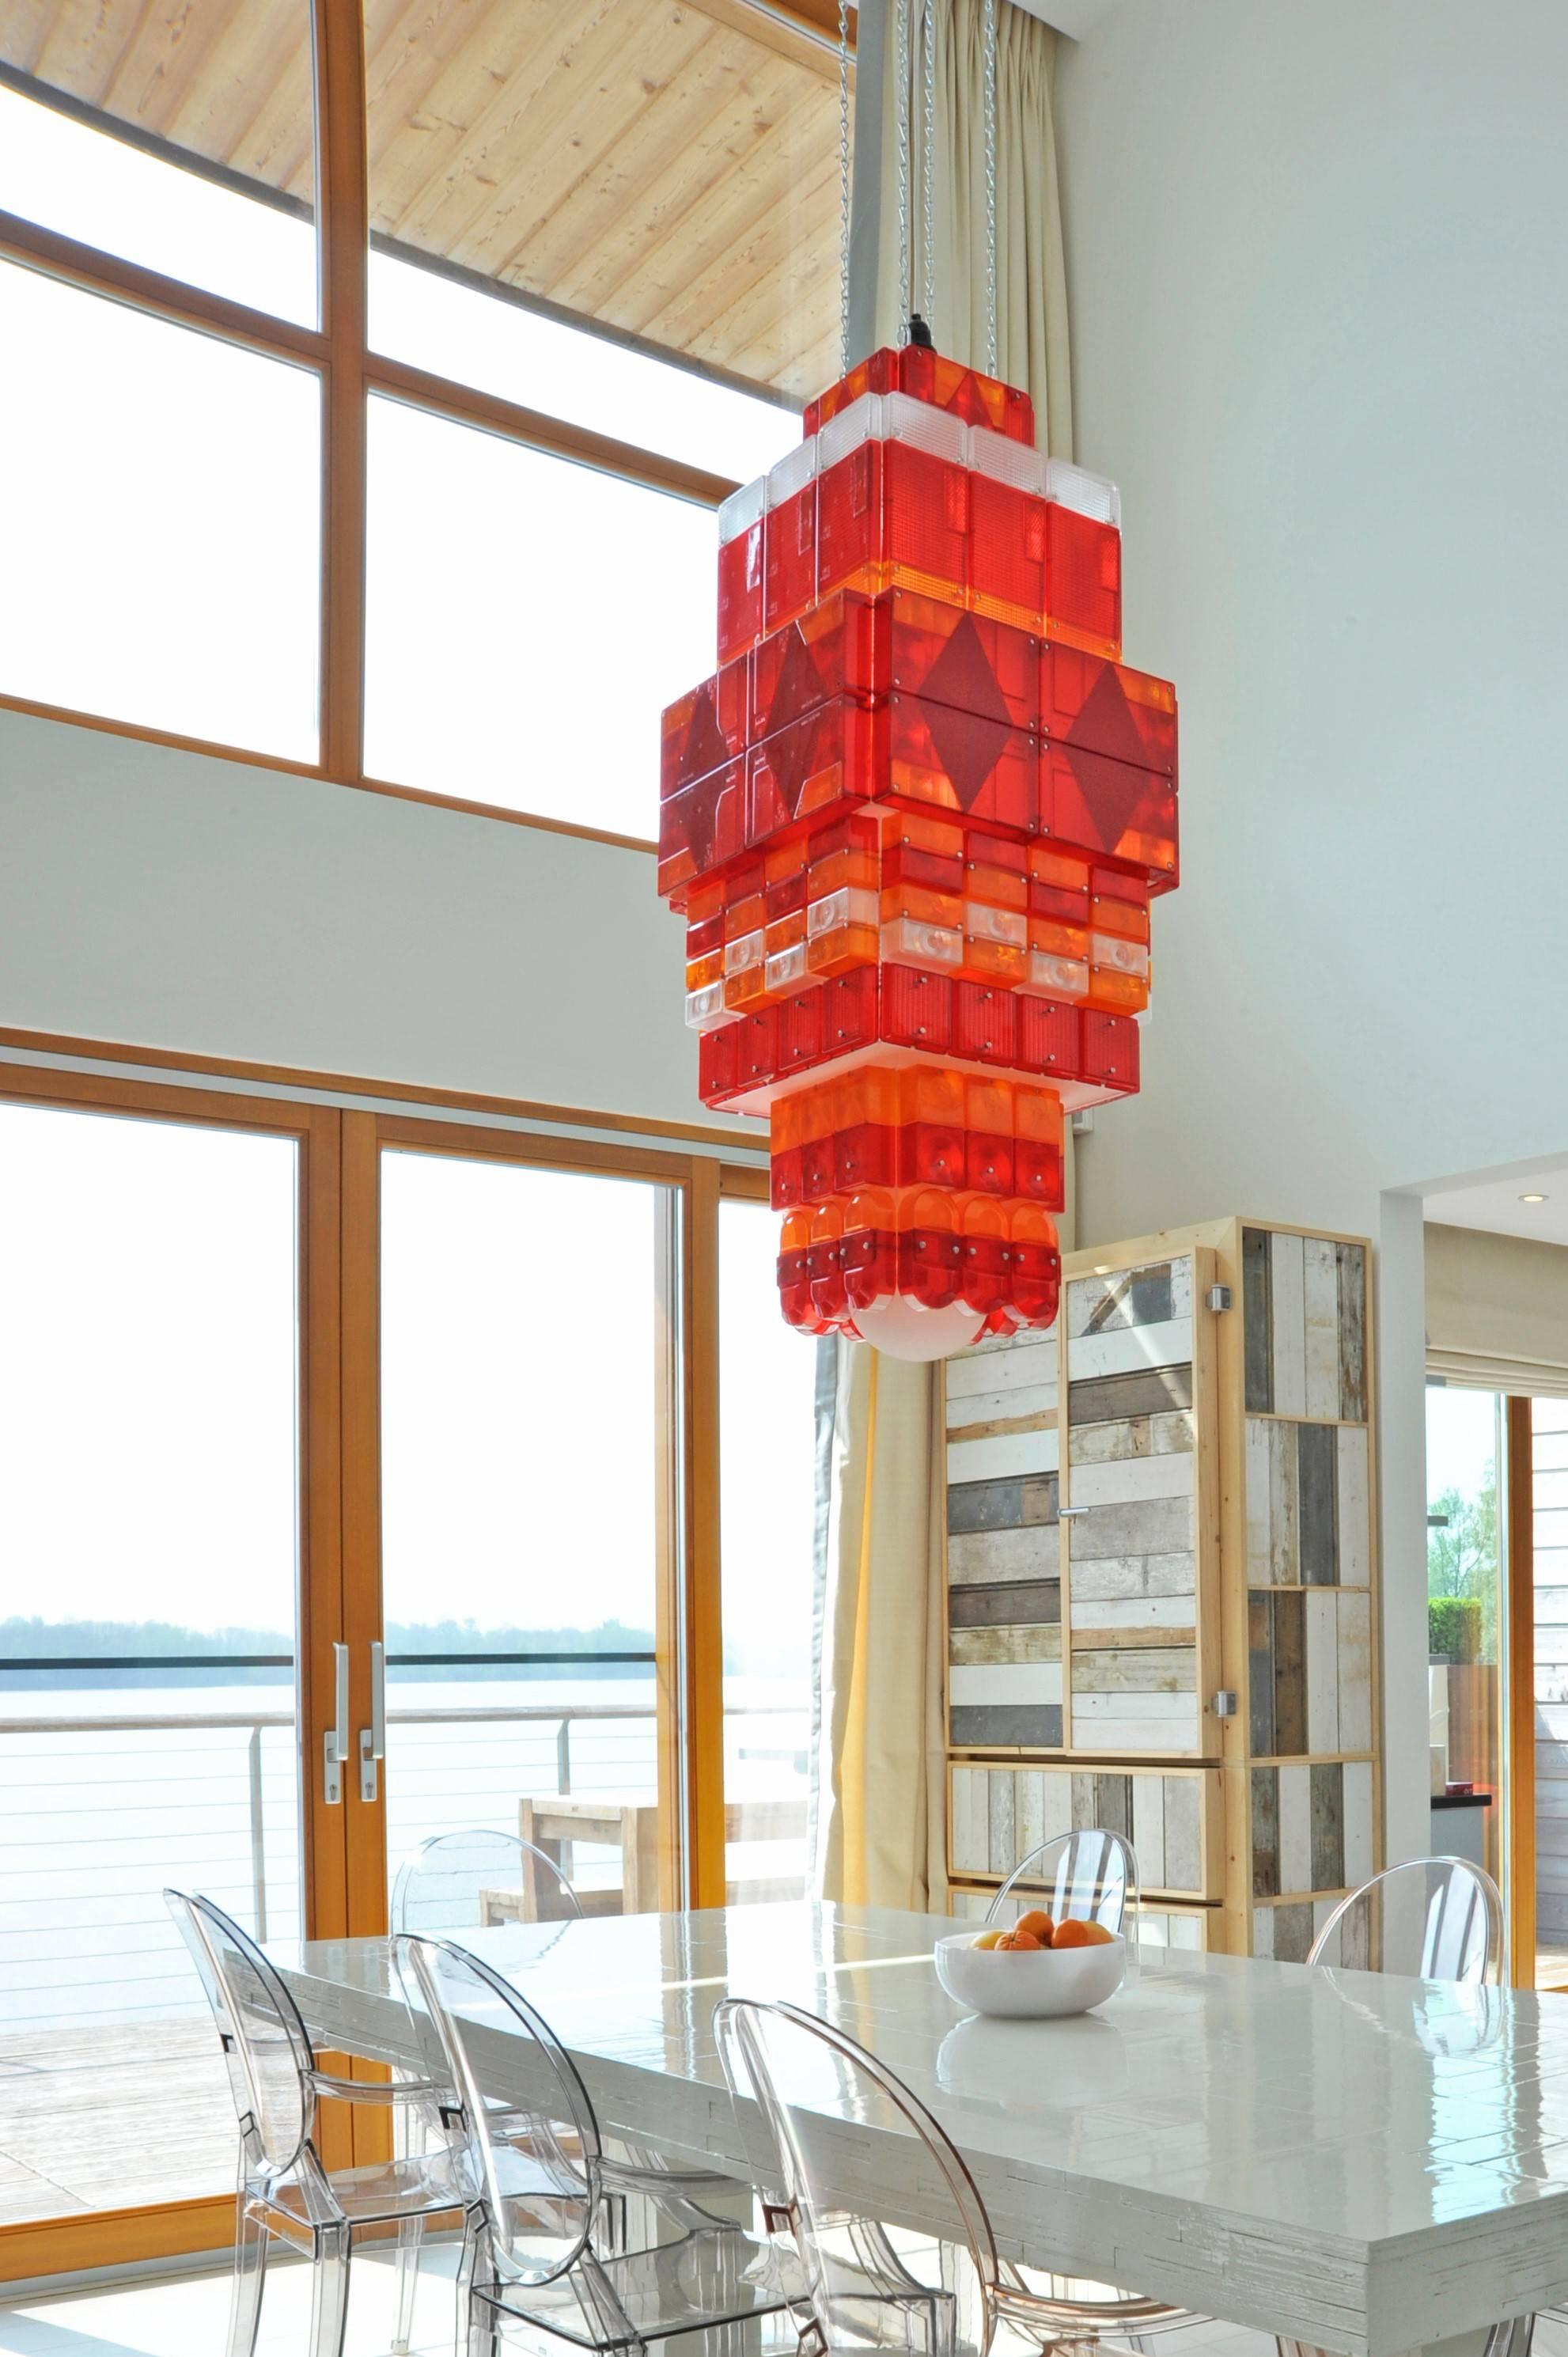 The chandelier is composed of an assortment of tail light covers from vehicles. Haygarth is known for his beautiful assemblages of discarded, mass produced, tonal objects. 

From Stuart Haygarth: 
